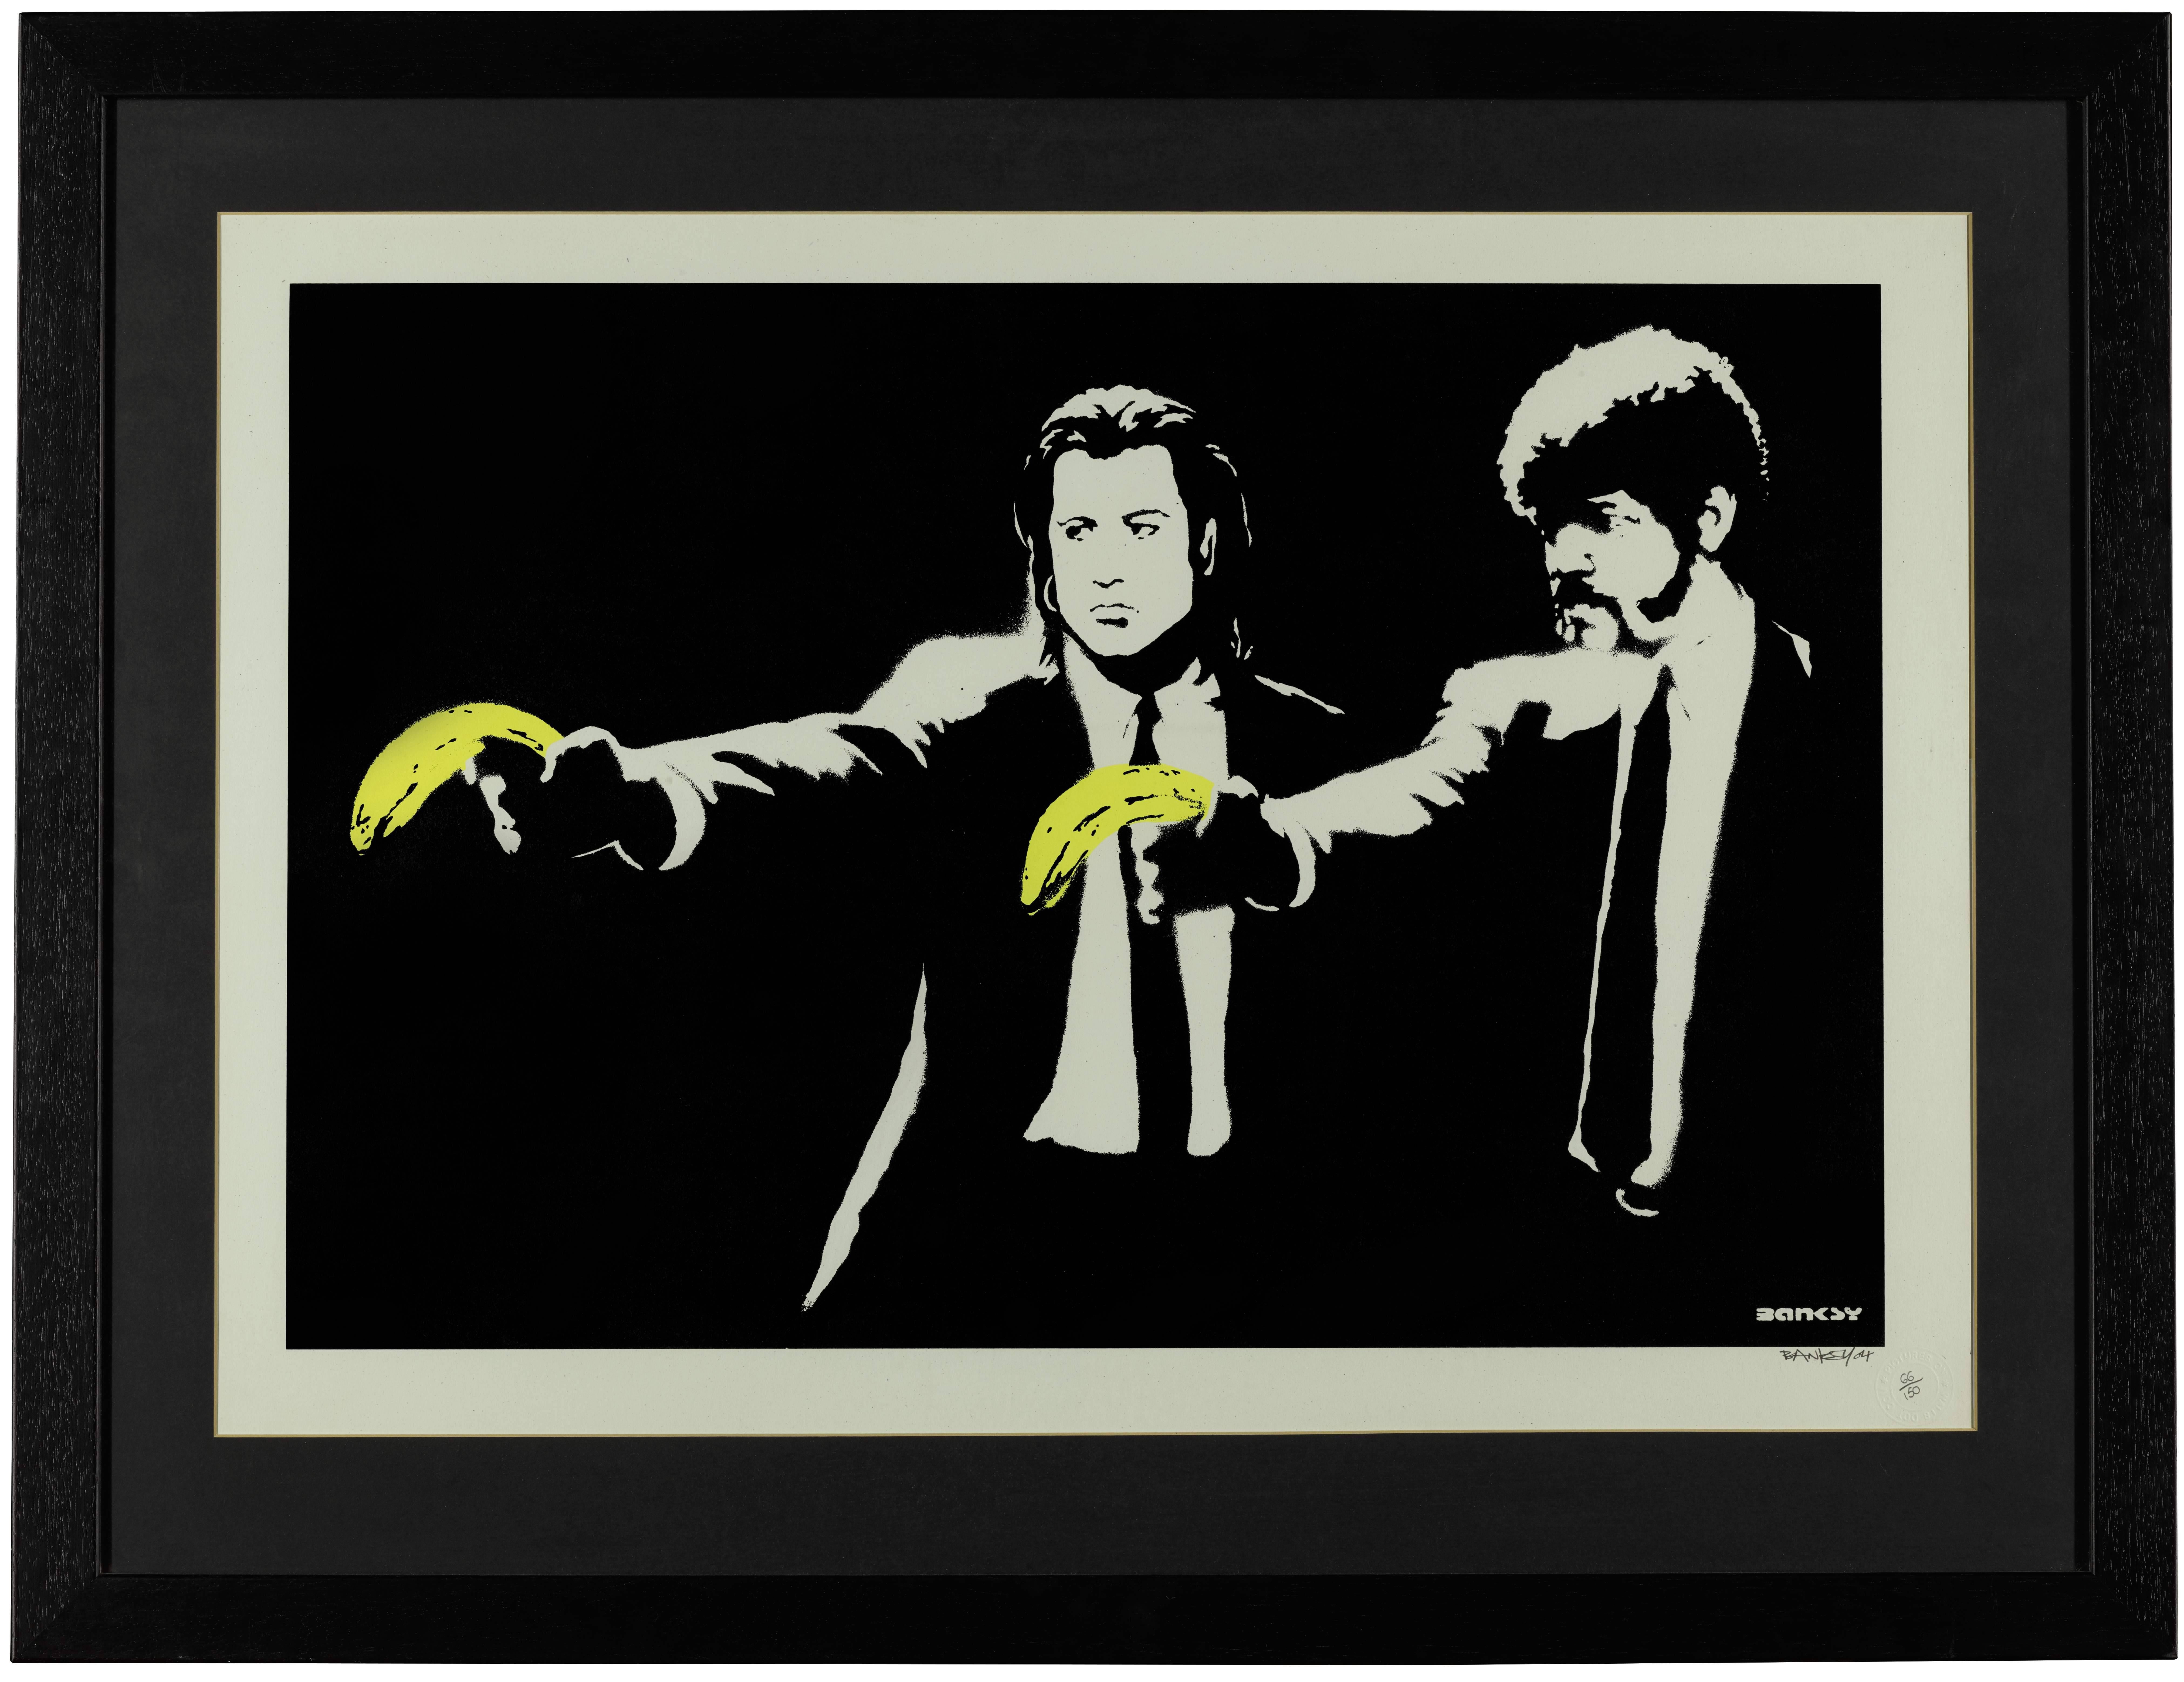 Pulp Fiction - Print by Banksy